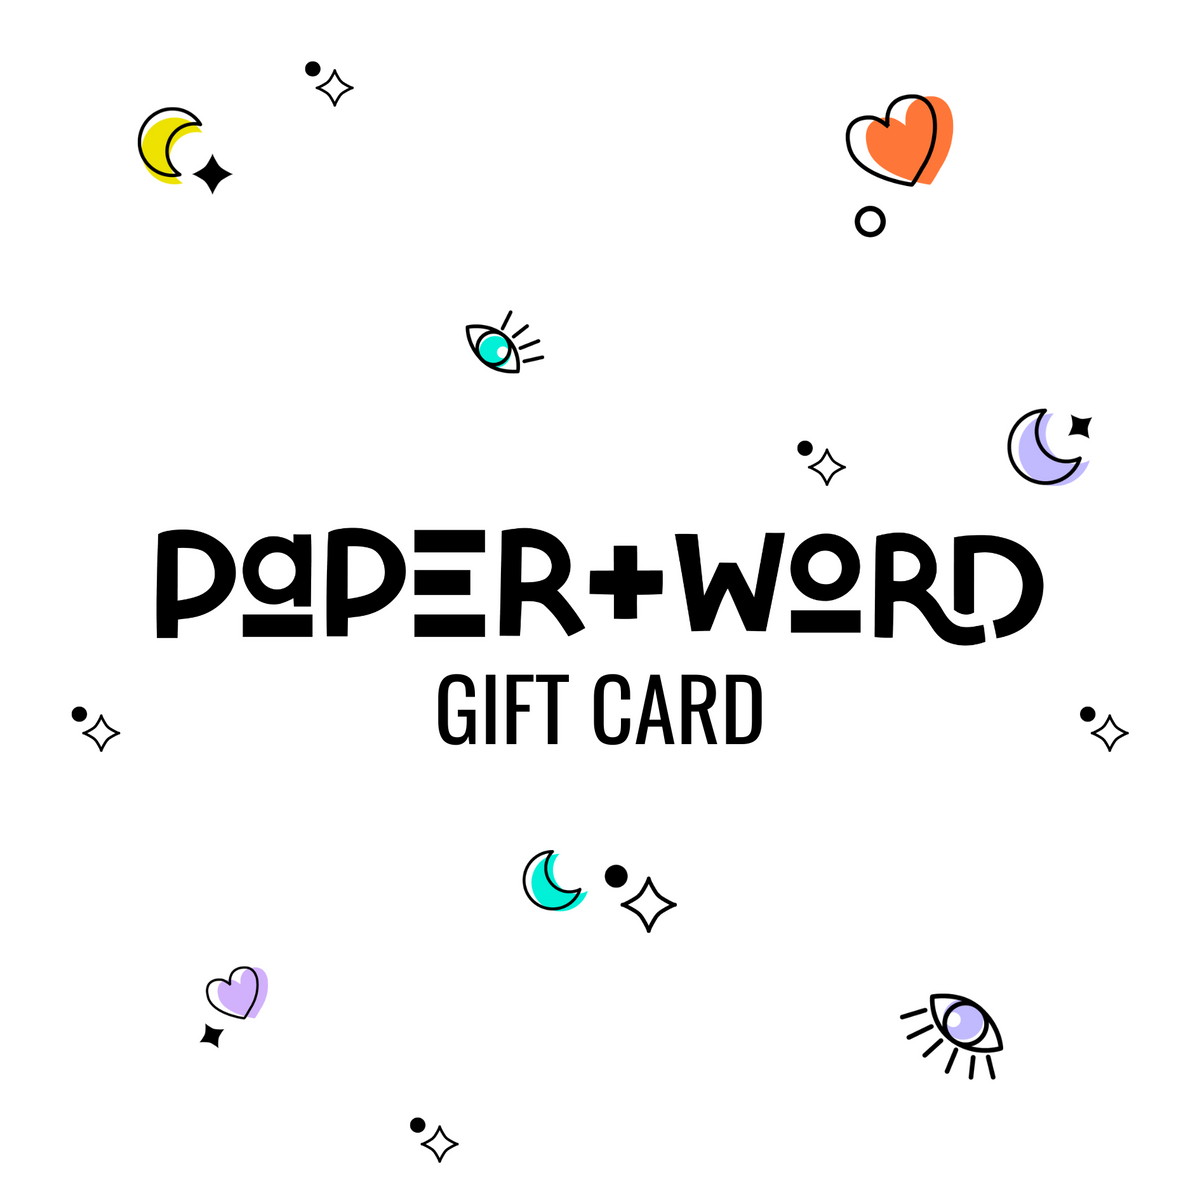 Paper + Word gift card